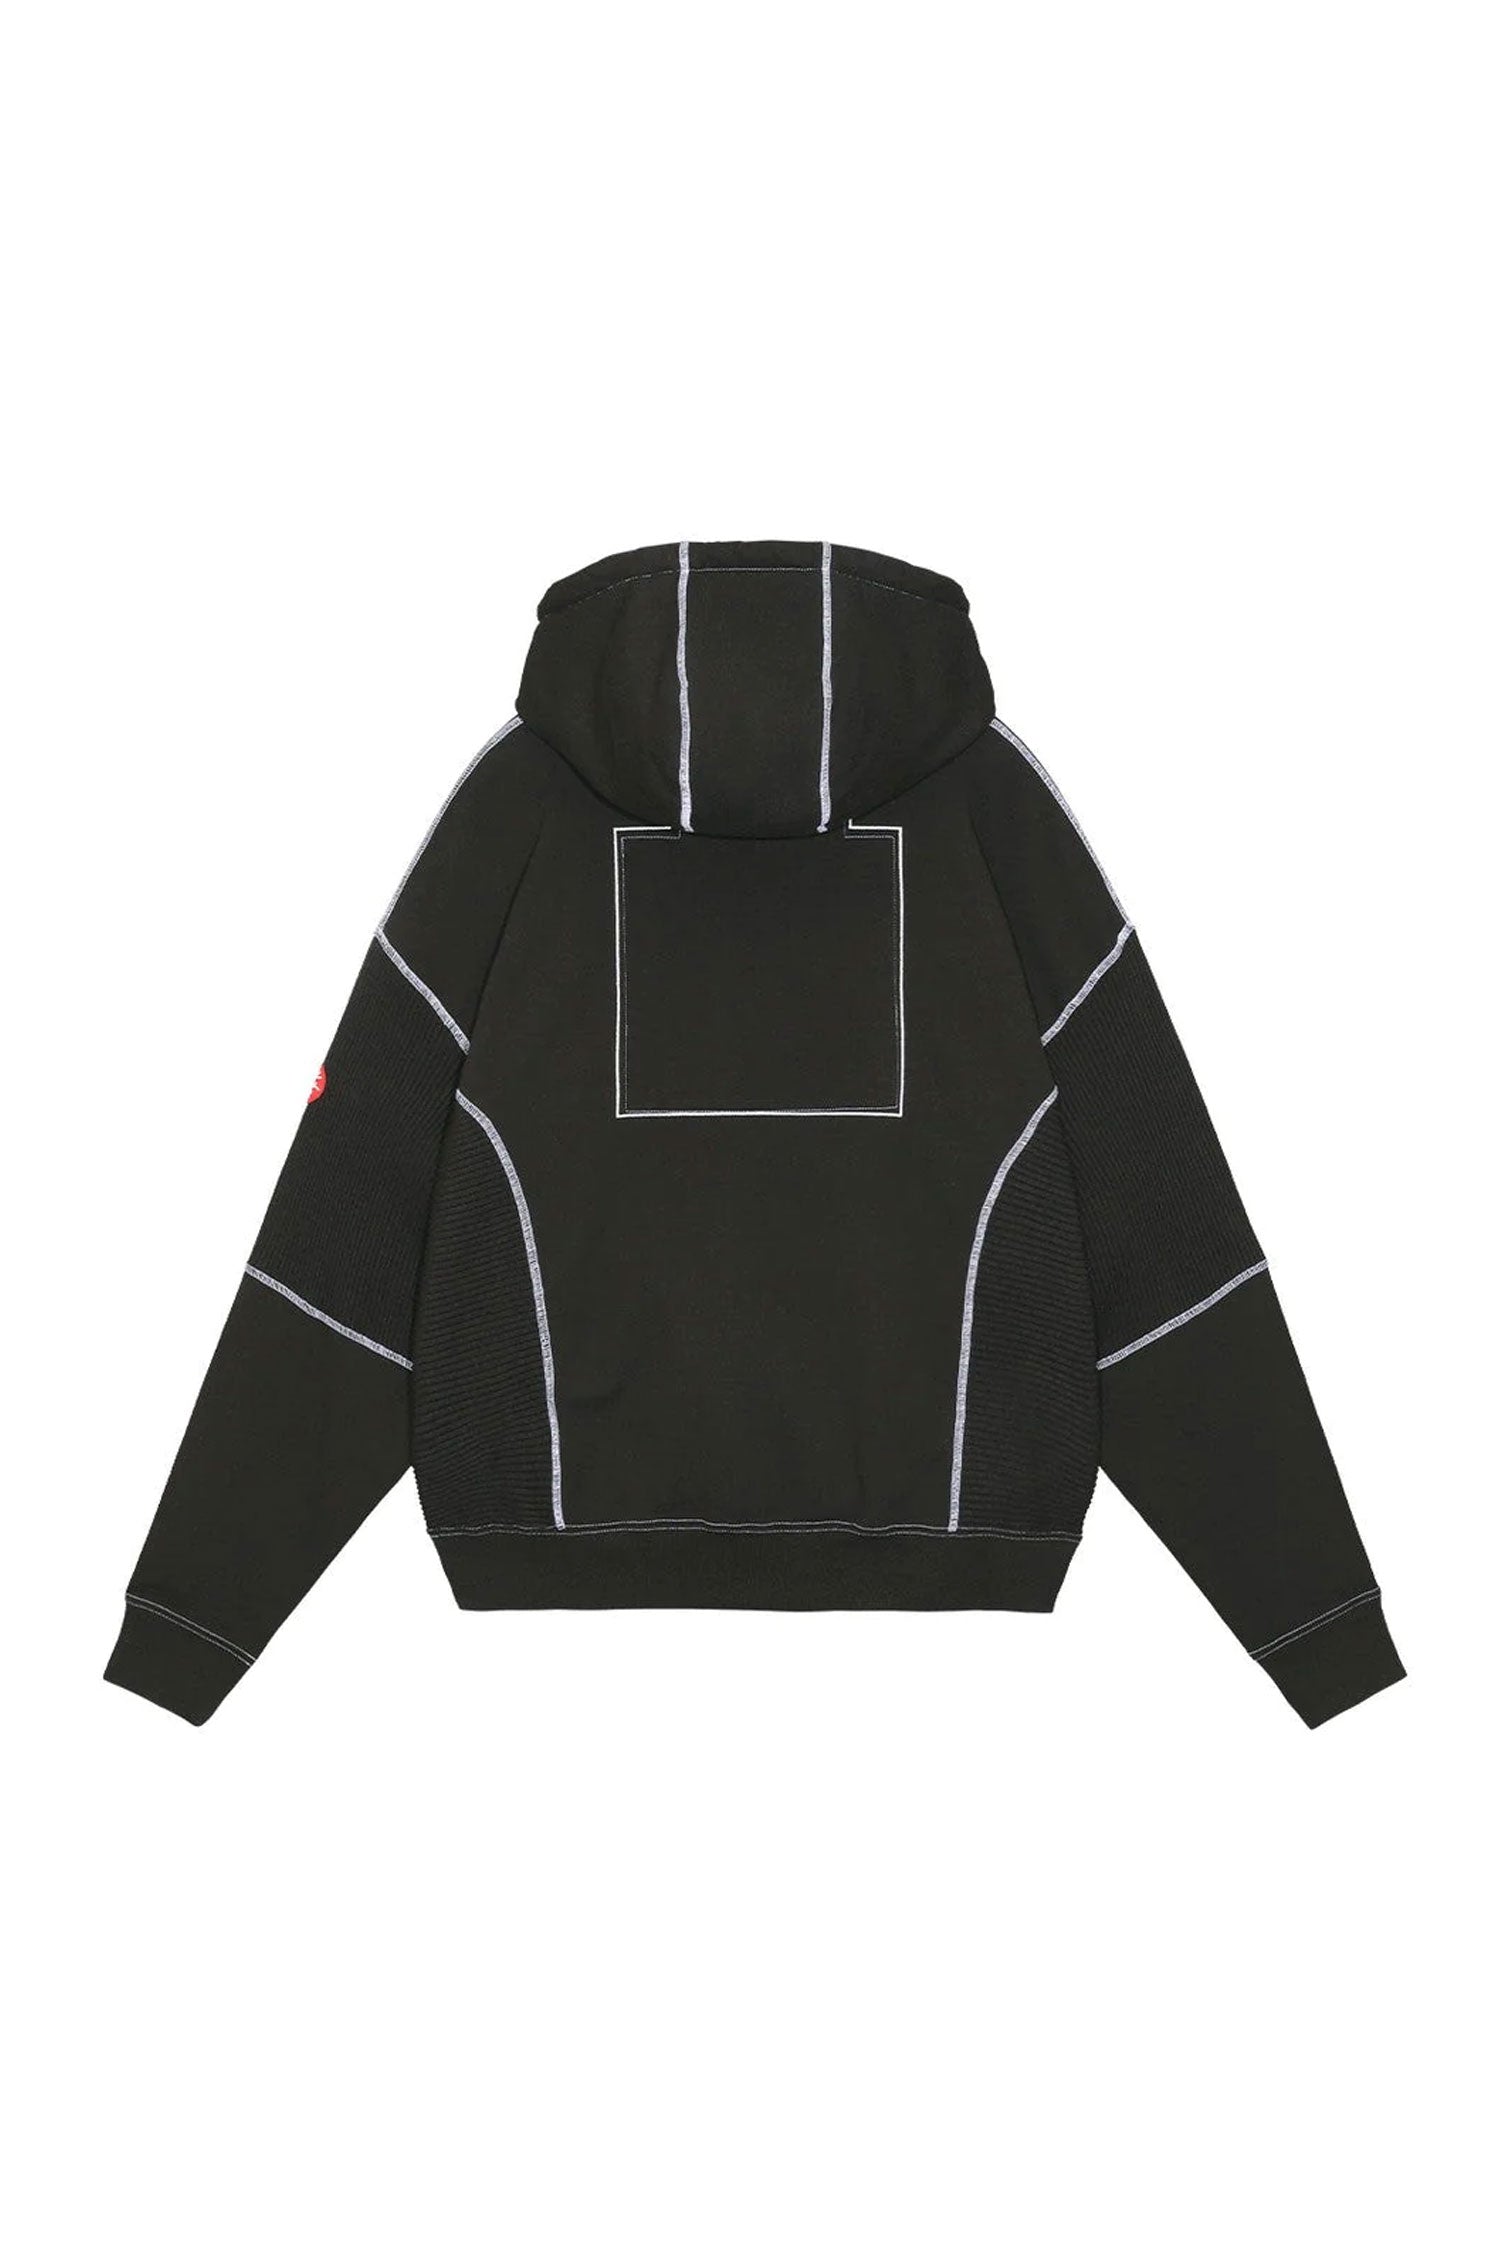 The CAV EMPT - WIDE RIB CUT HEAVY HOODY  available online with global shipping, and in PAM Stores Melbourne and Sydney.